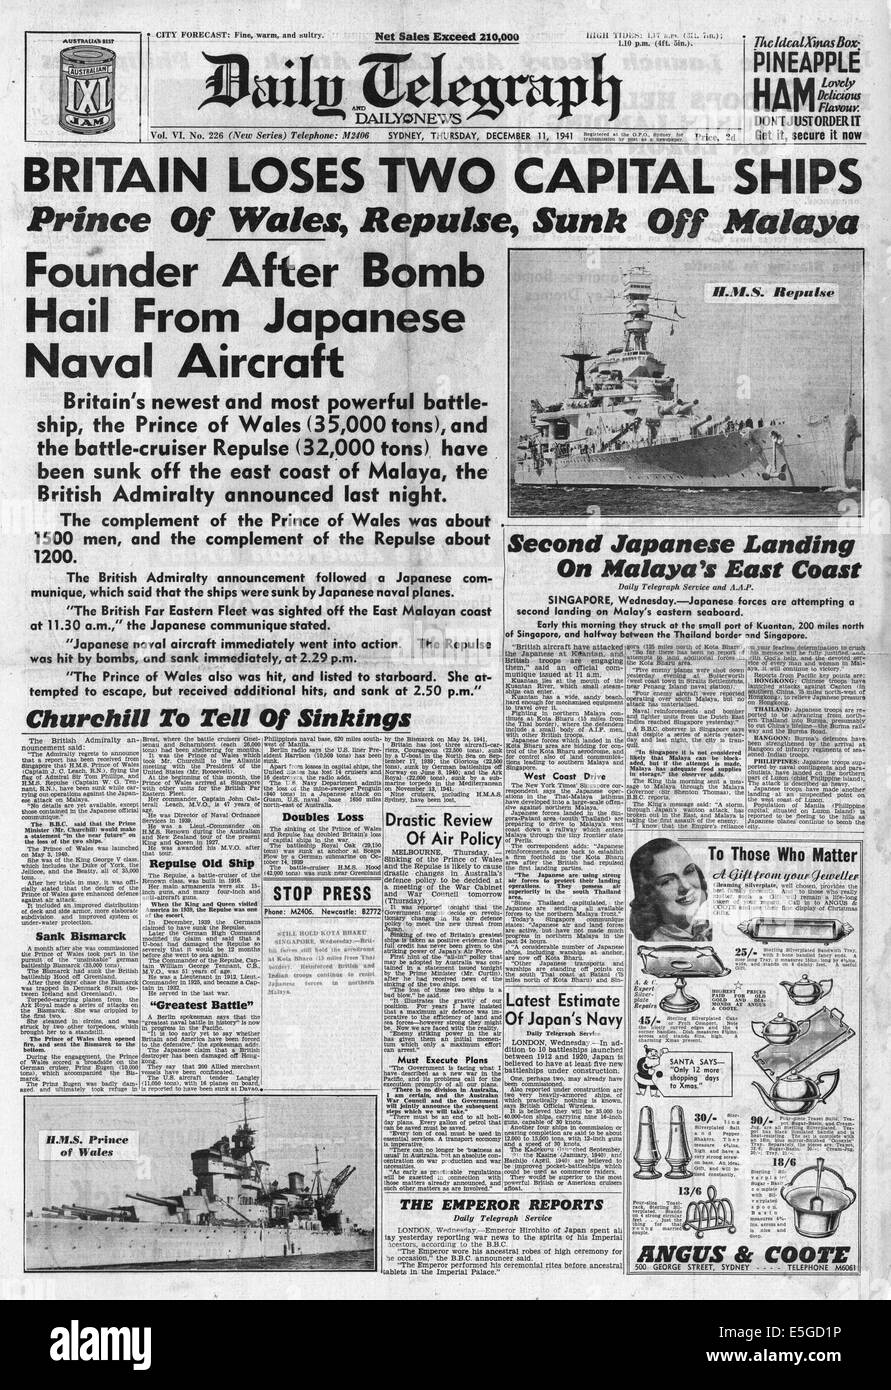 1941 Daily Telegraph (Sydney, Australia) front page reporting Japanese planes sink British battleships HMS Repulse and HMS Prince of Wales off Malaya Stock Photo